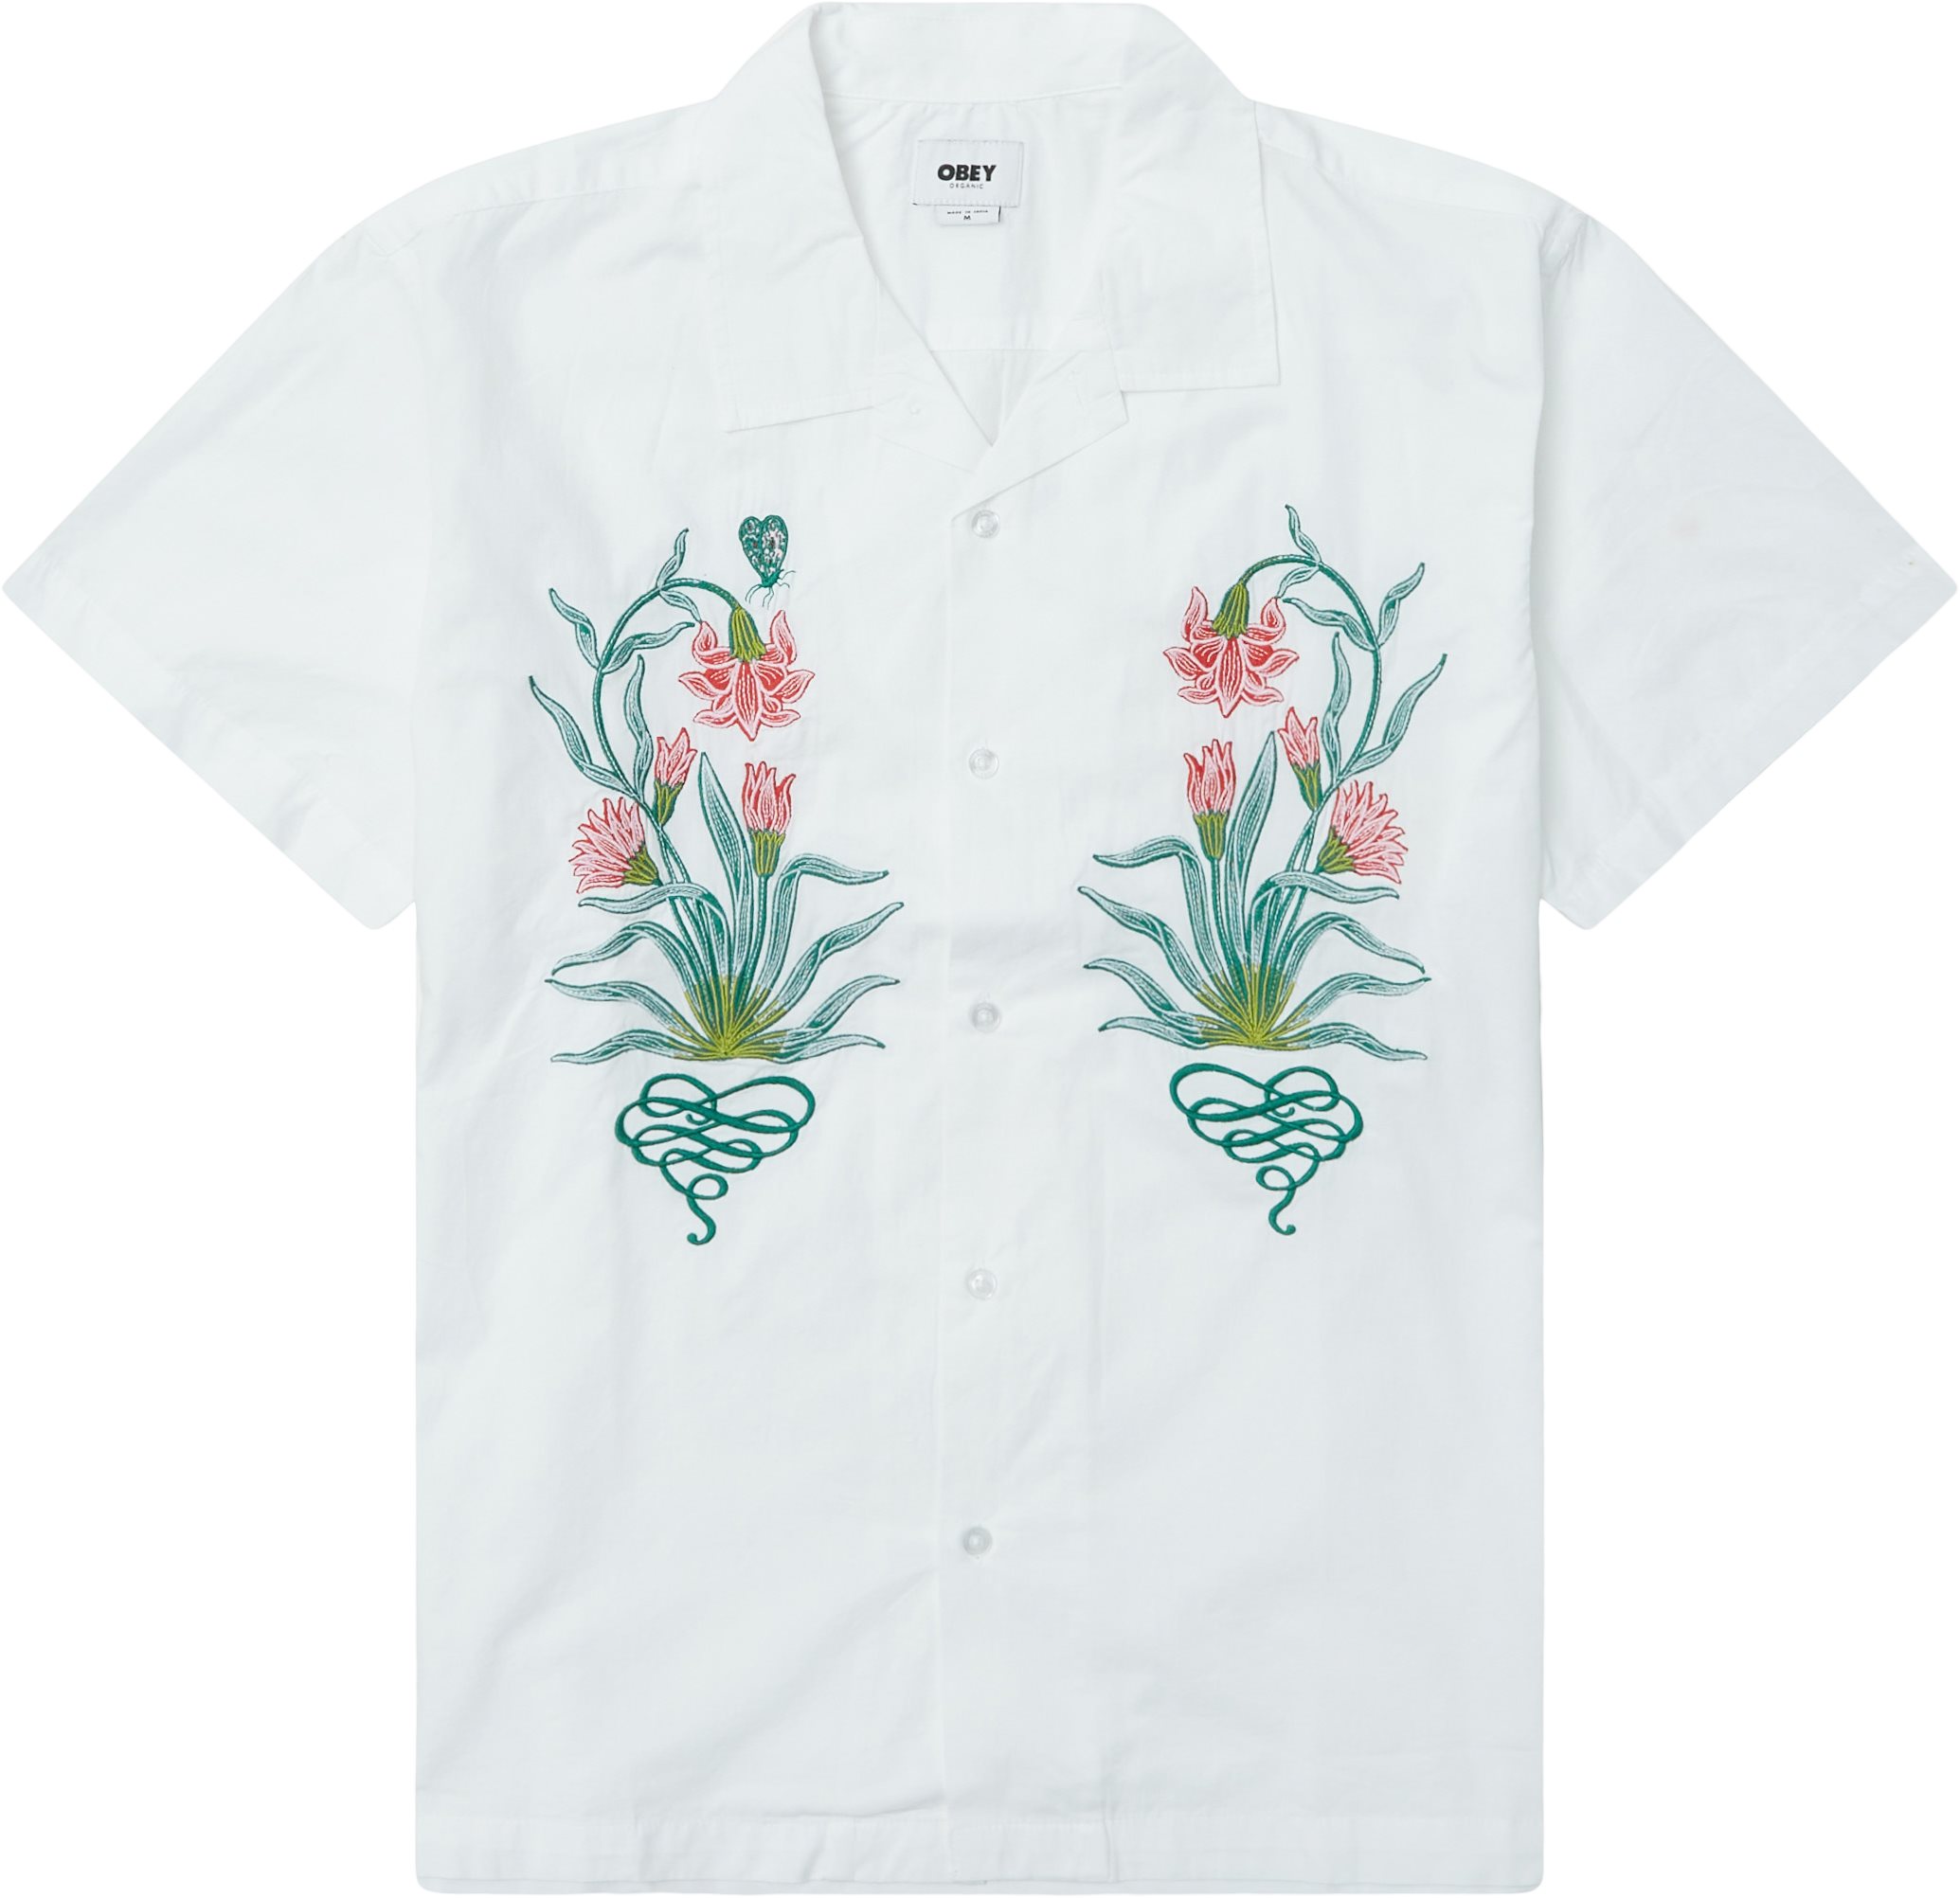 Obey Shirts ADORED 181210334 White